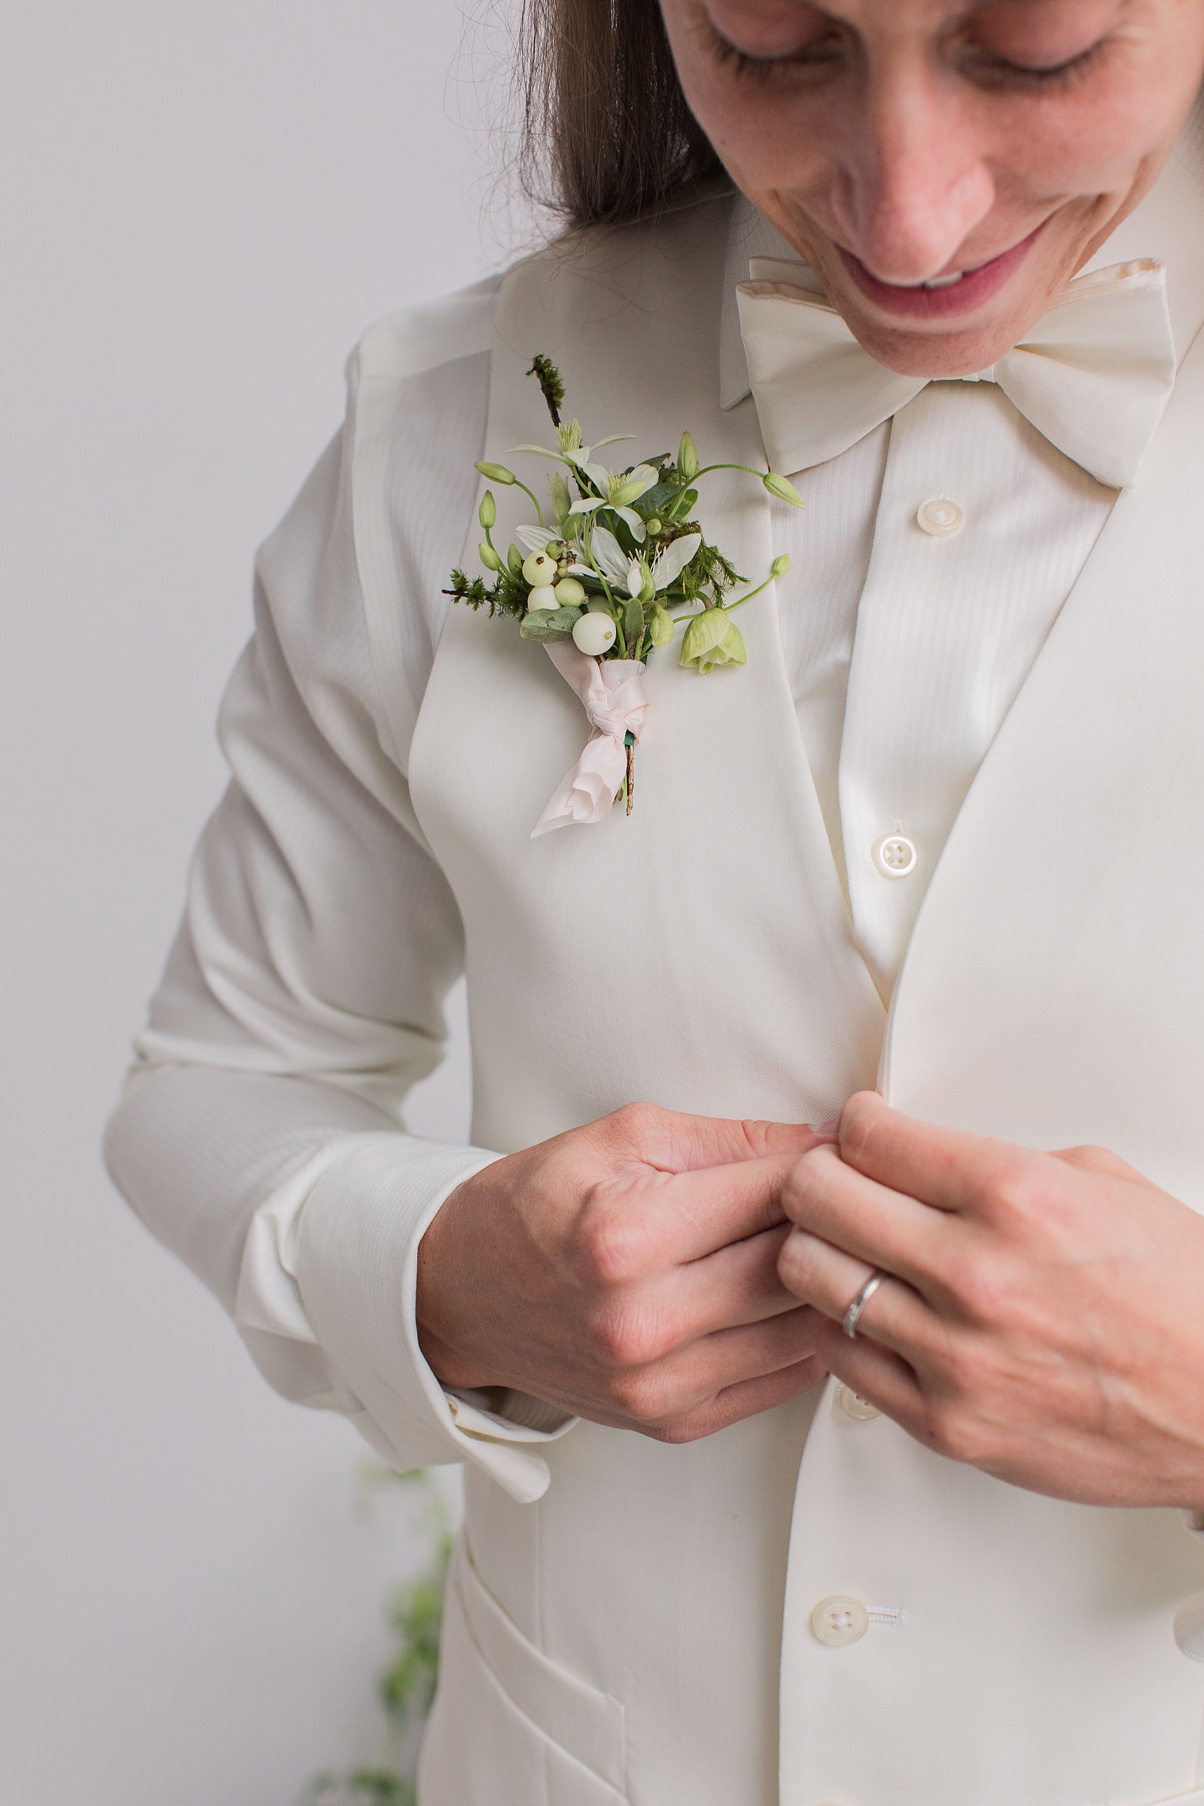 A bride with a boutonniere buttoning up a white vest